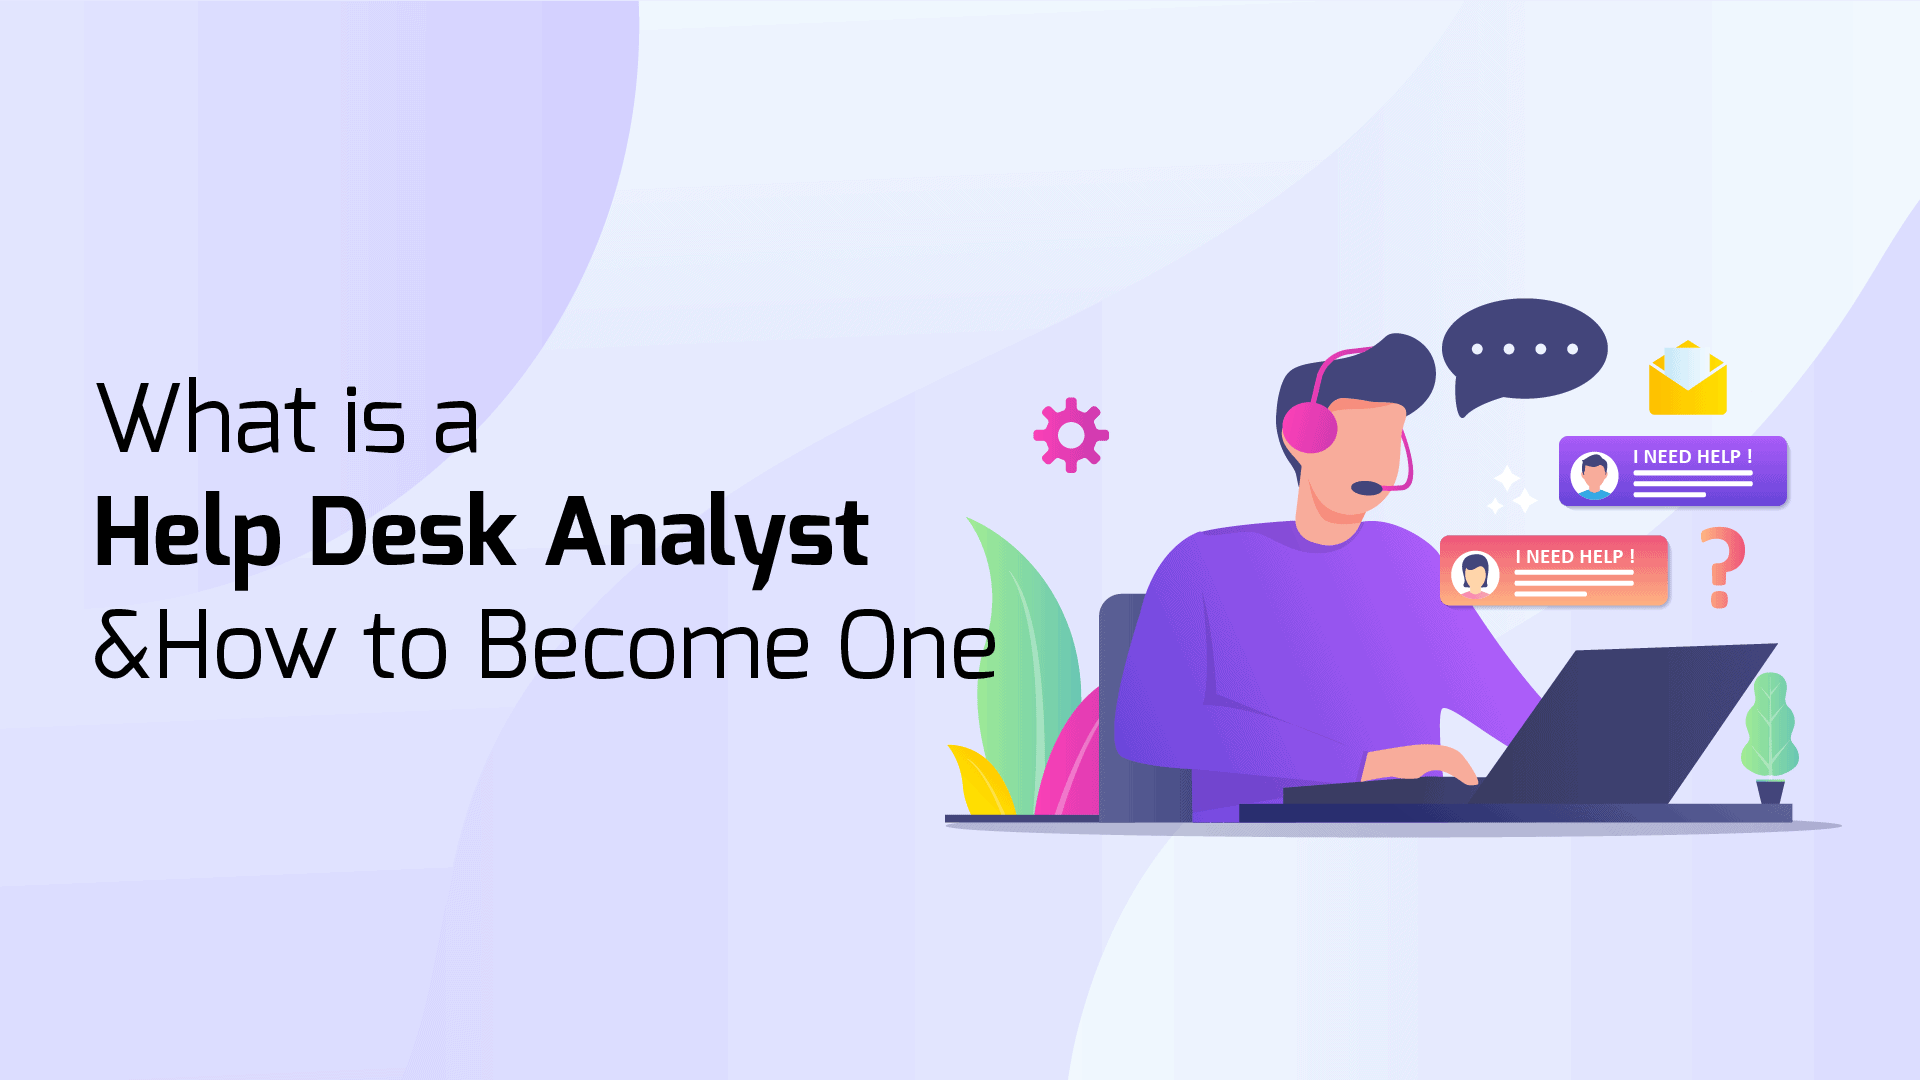 How to become a help desk analyst